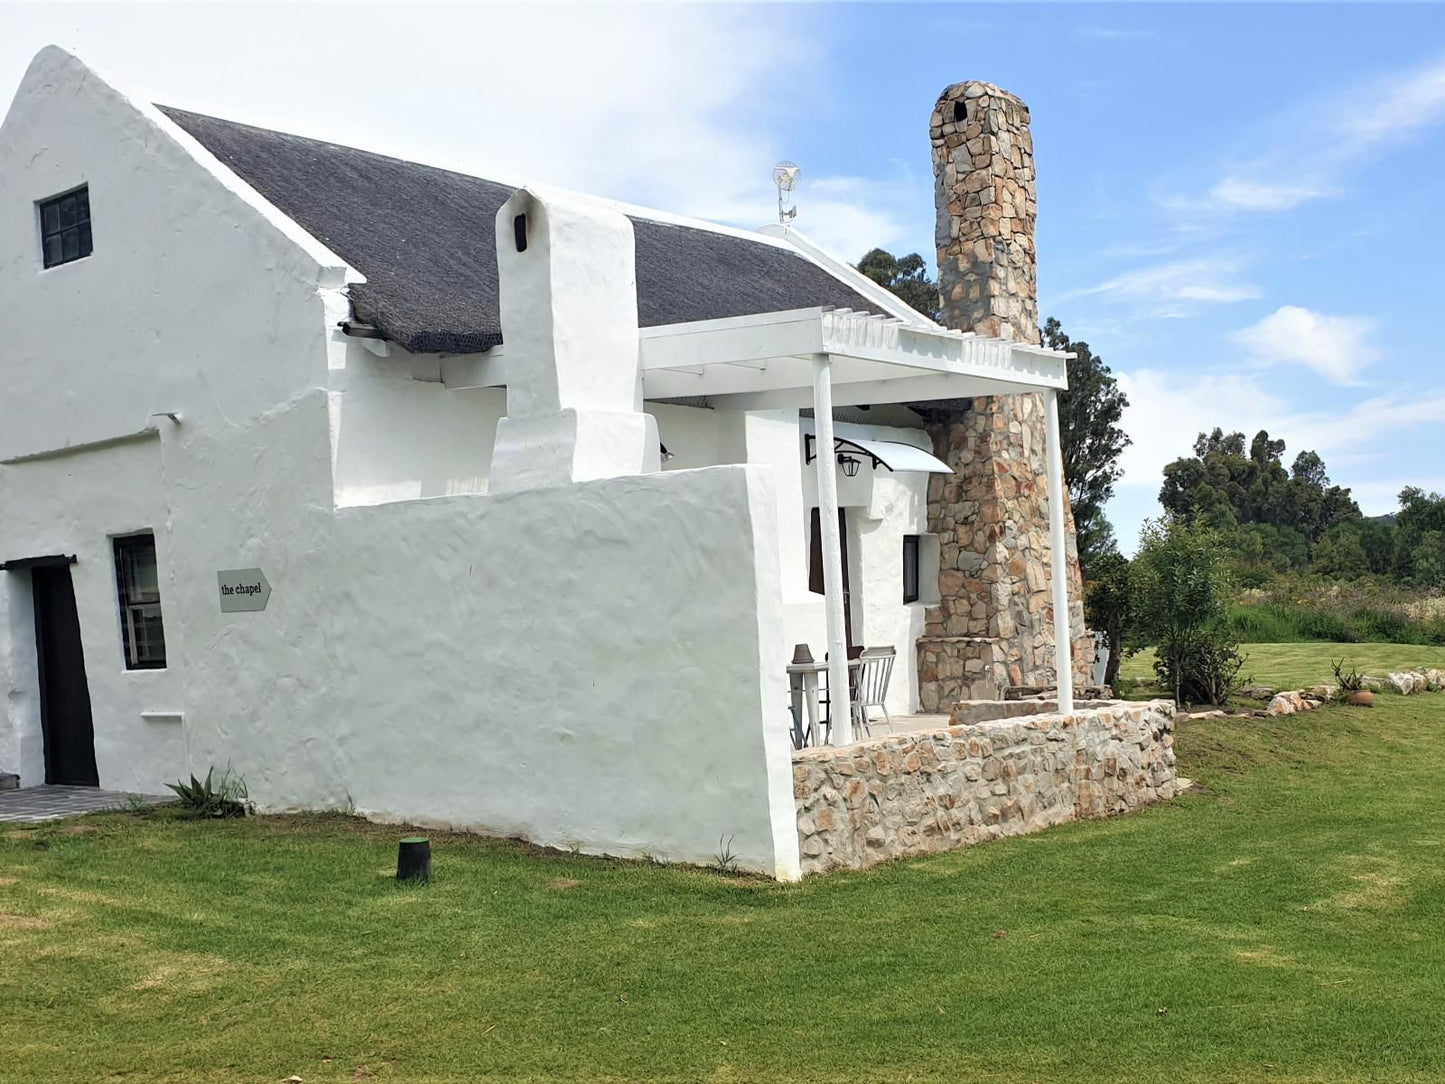 Berg N Dal Heritage Farm Gansbaai Western Cape South Africa Building, Architecture, House